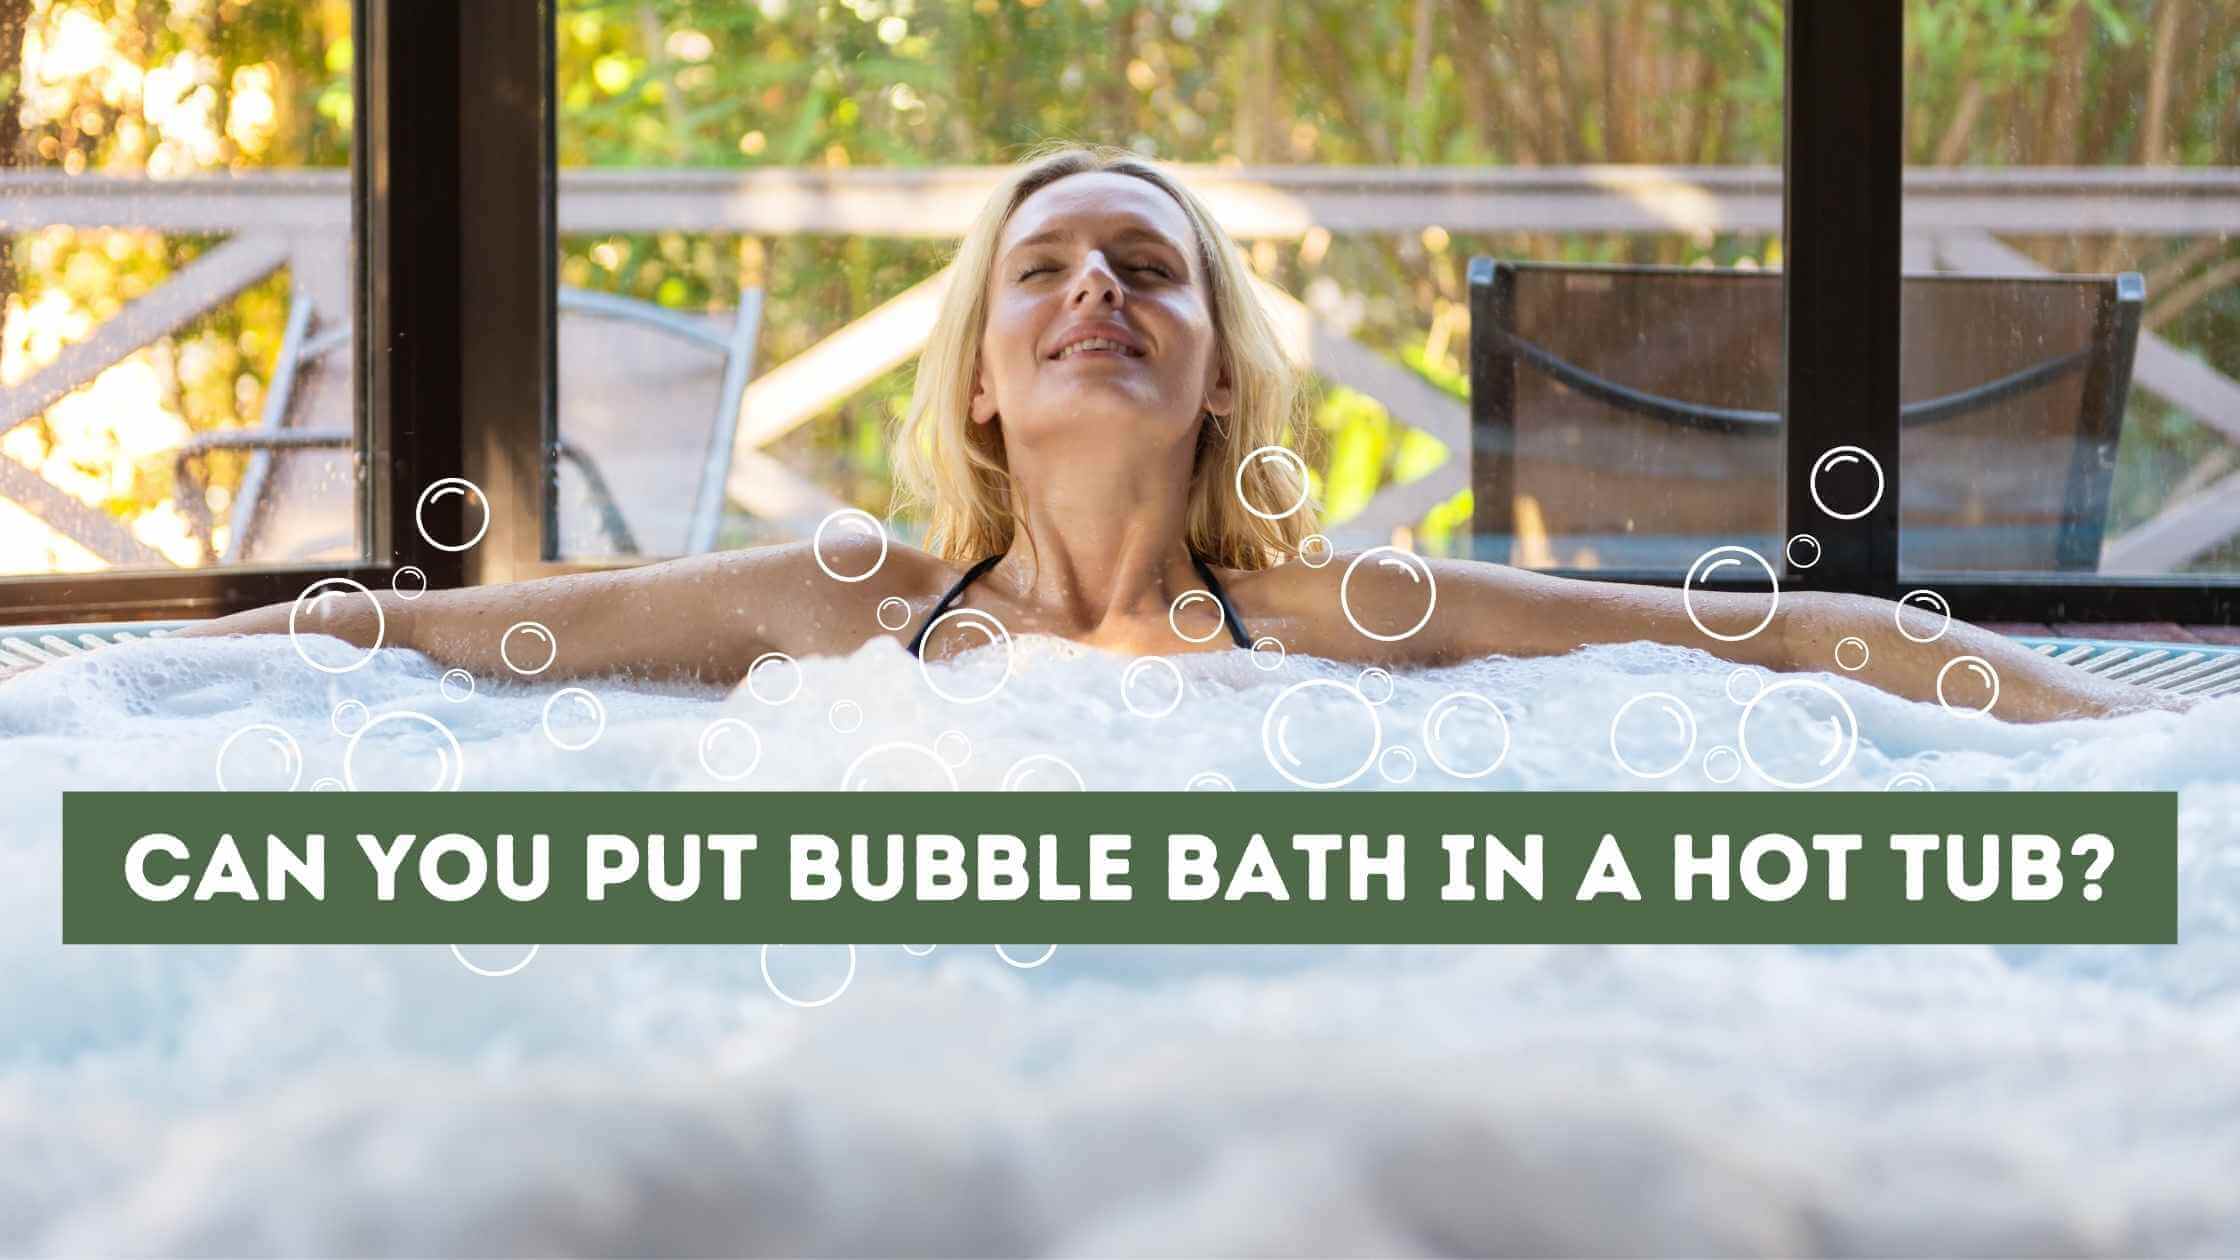 Can You Put Bubble Bath in a Hot Tub